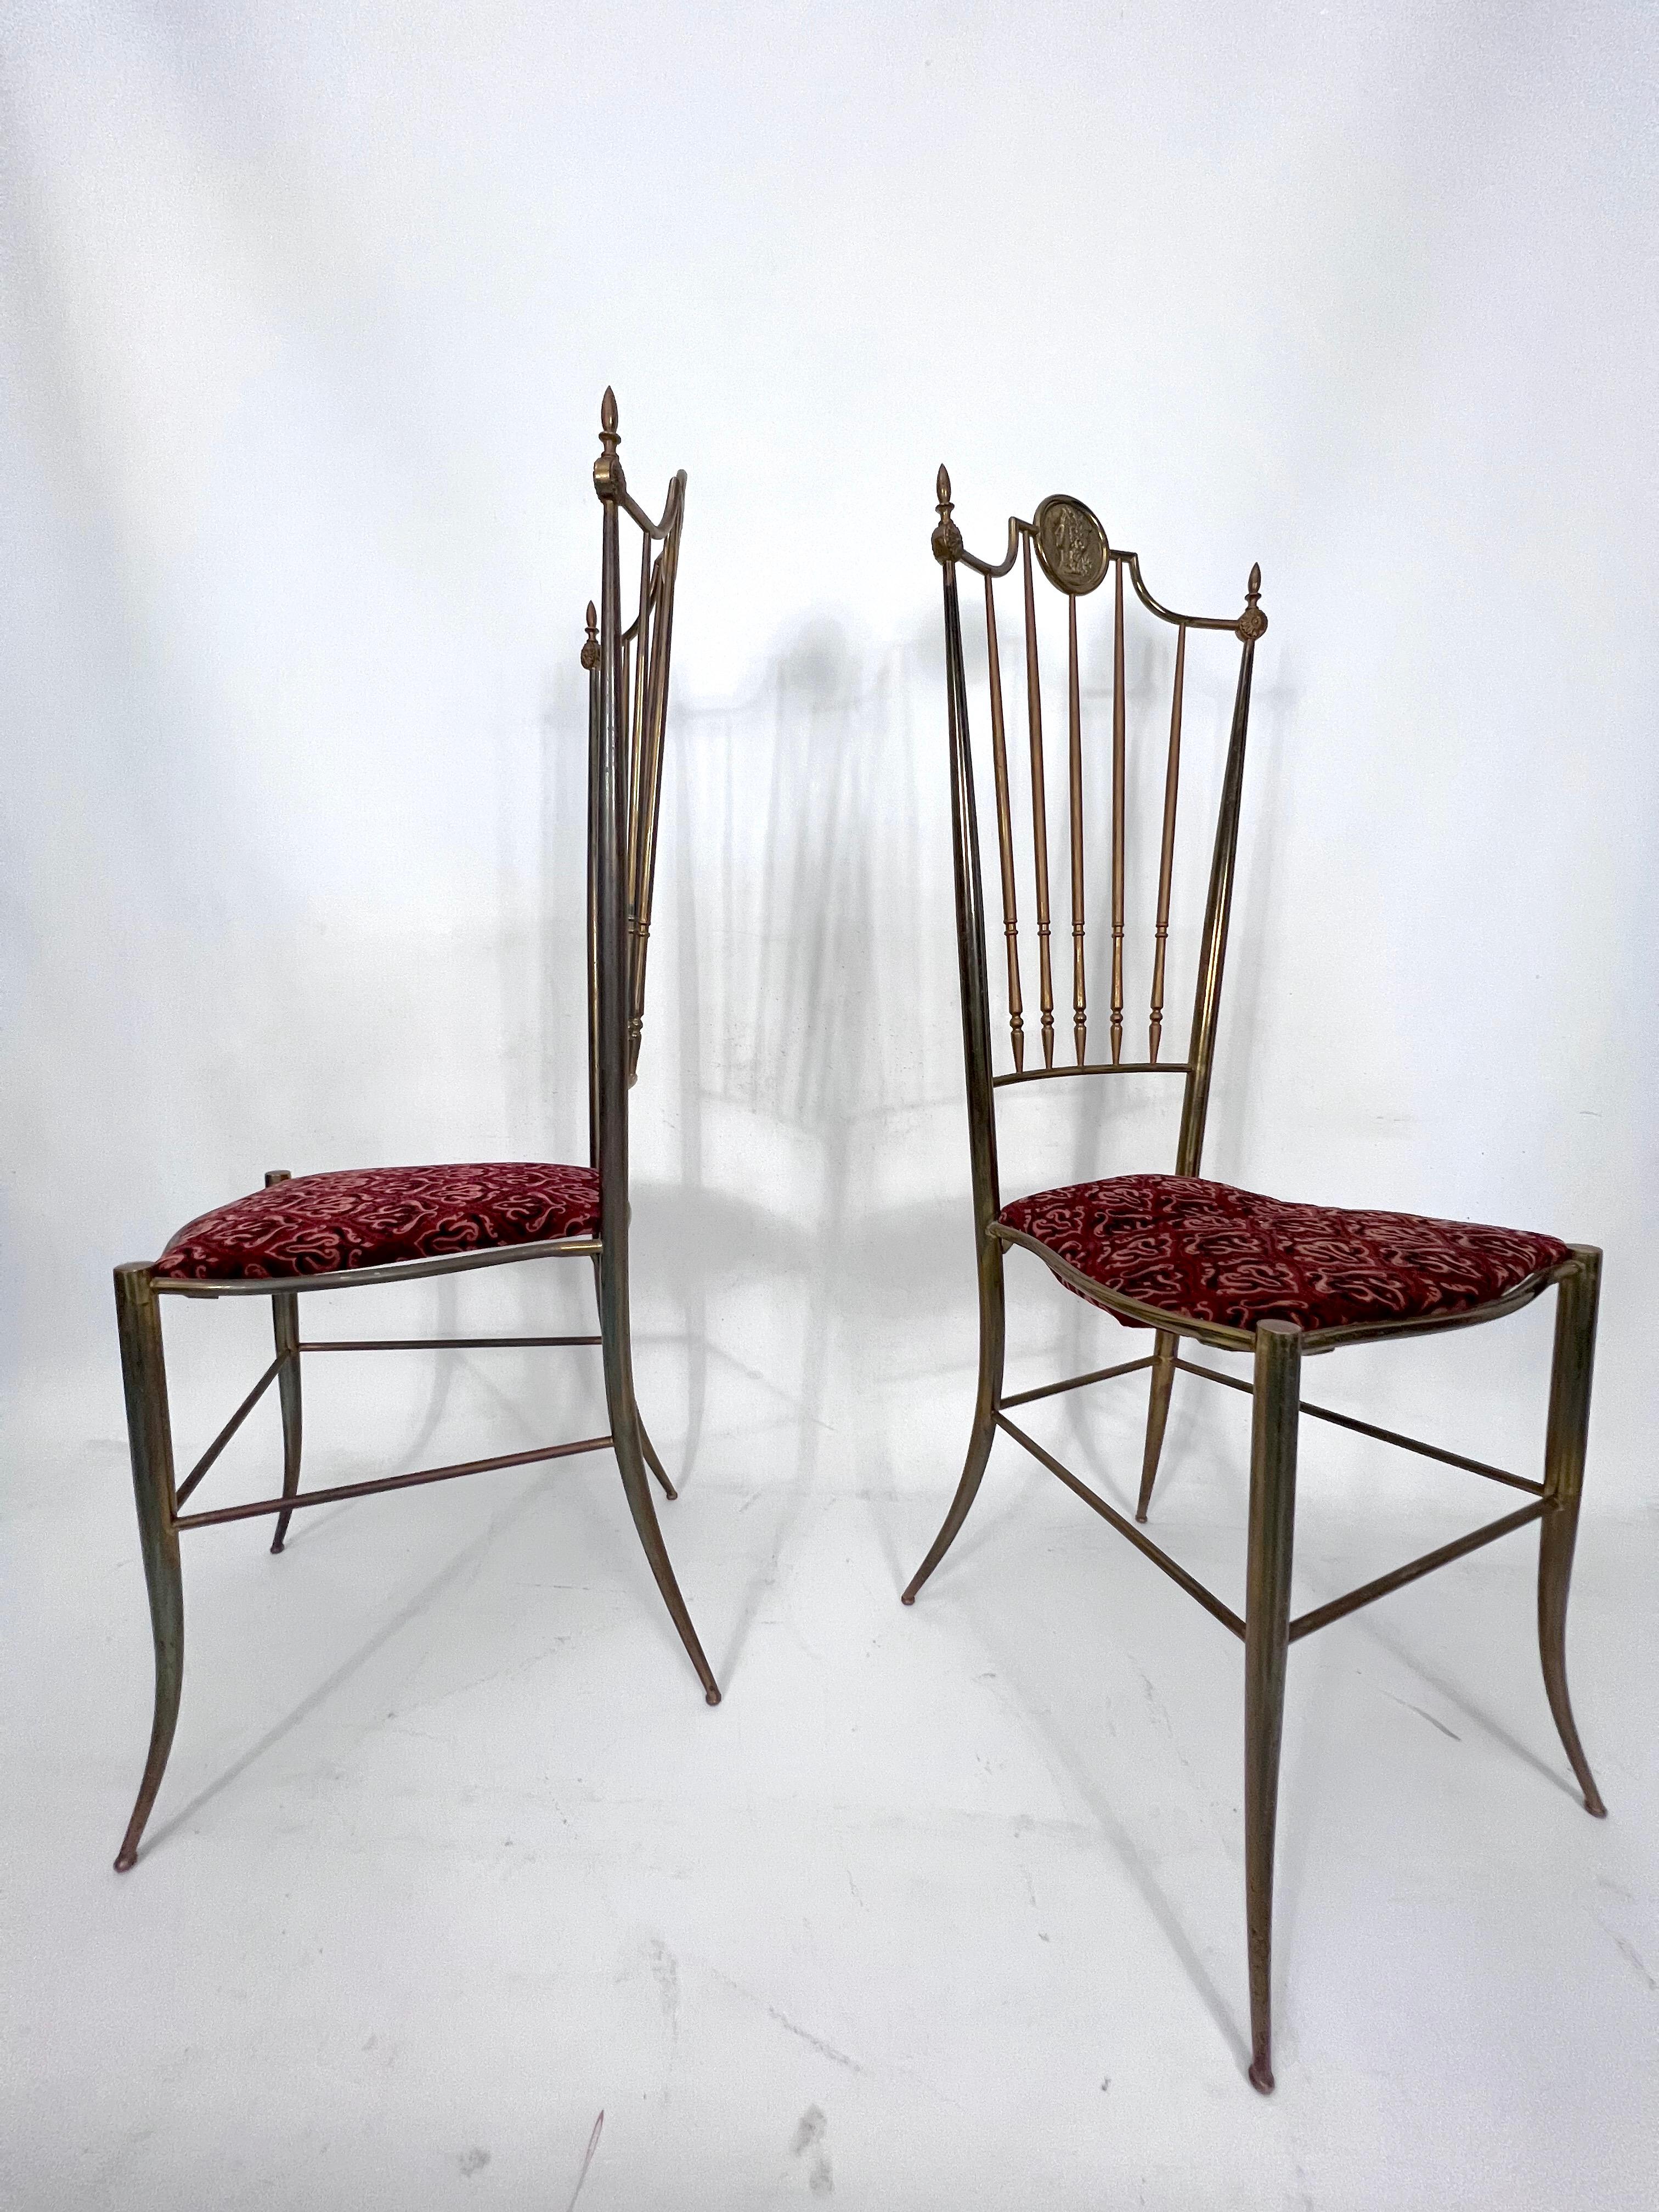 Vintage Pair of Brass Tall Chairs from Chiavari, Italy, 1950s For Sale 5